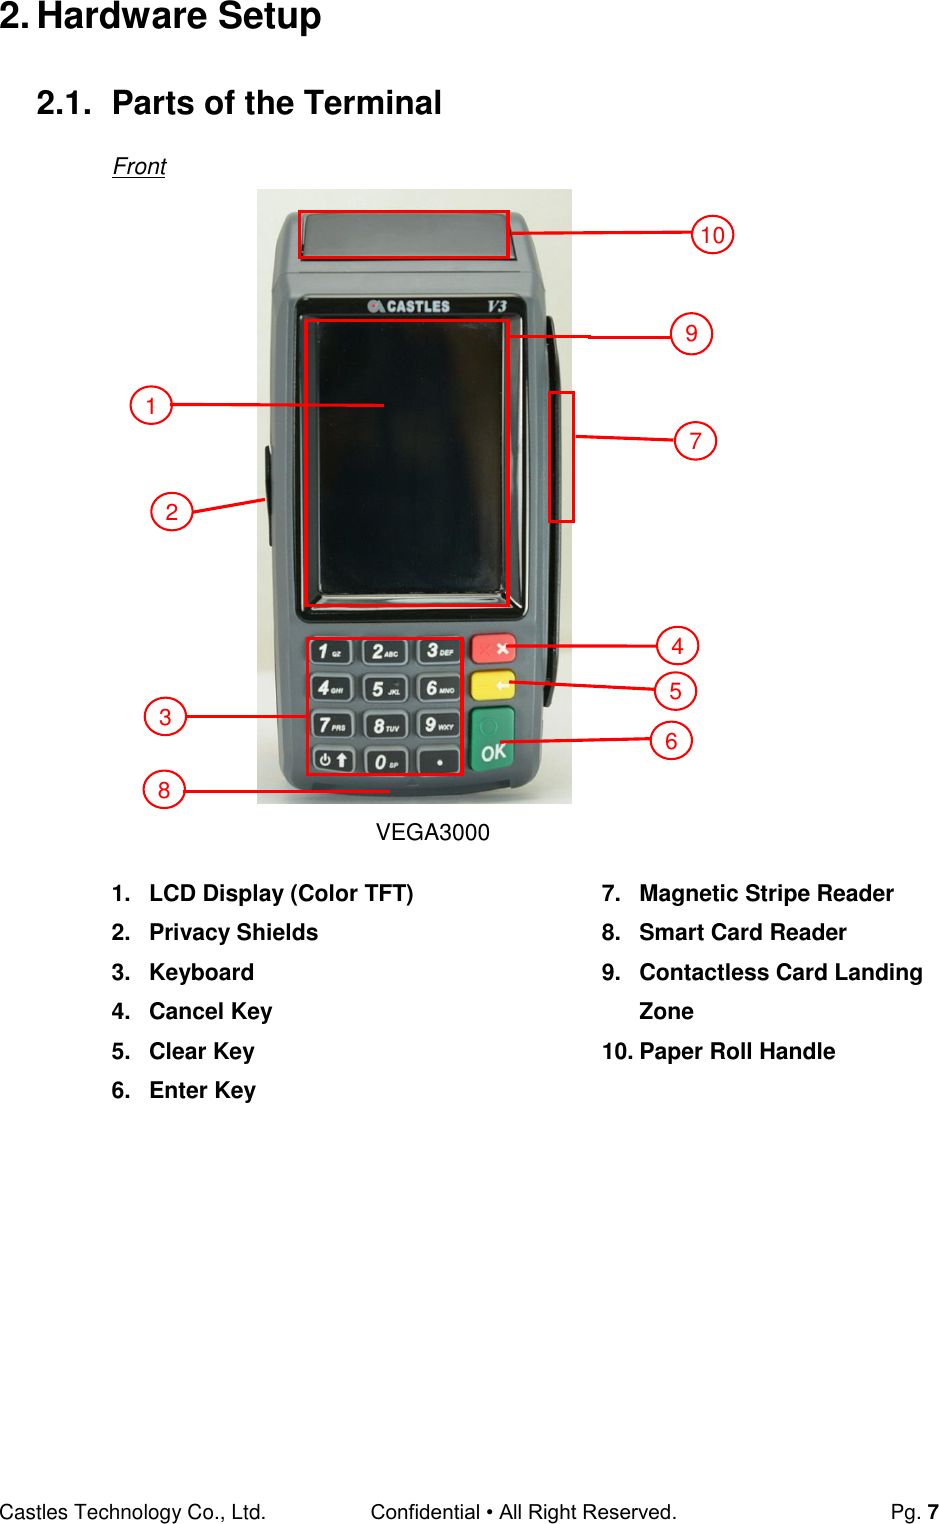 Castles Technology Co., Ltd. Confidential • All Right Reserved.  Pg. 7 2. Hardware Setup  2.1.  Parts of the Terminal Front                                   1.  LCD Display (Color TFT) 2.  Privacy Shields 3.  Keyboard 4.  Cancel Key 5.  Clear Key 6.  Enter Key 7.  Magnetic Stripe Reader 8.  Smart Card Reader 9.  Contactless Card Landing Zone 10. Paper Roll Handle      VEGA3000 1 2 3 5 8 9 10 6 7 4 